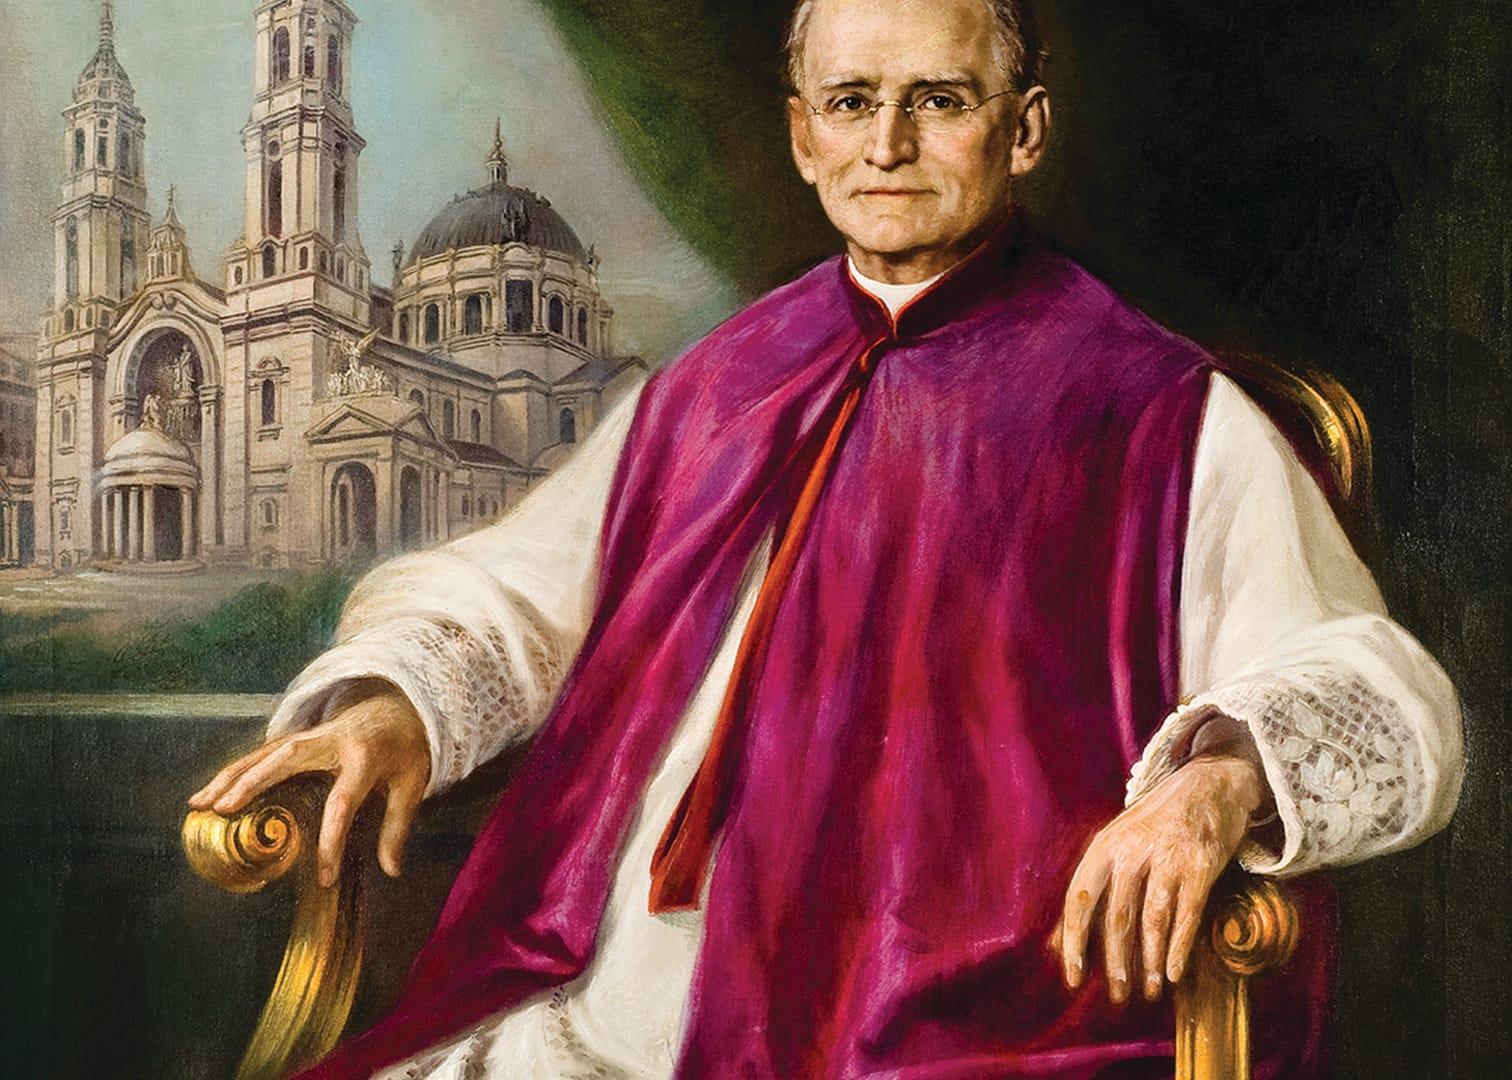 Priest from Buffalo, New York, is on slow path to sainthood